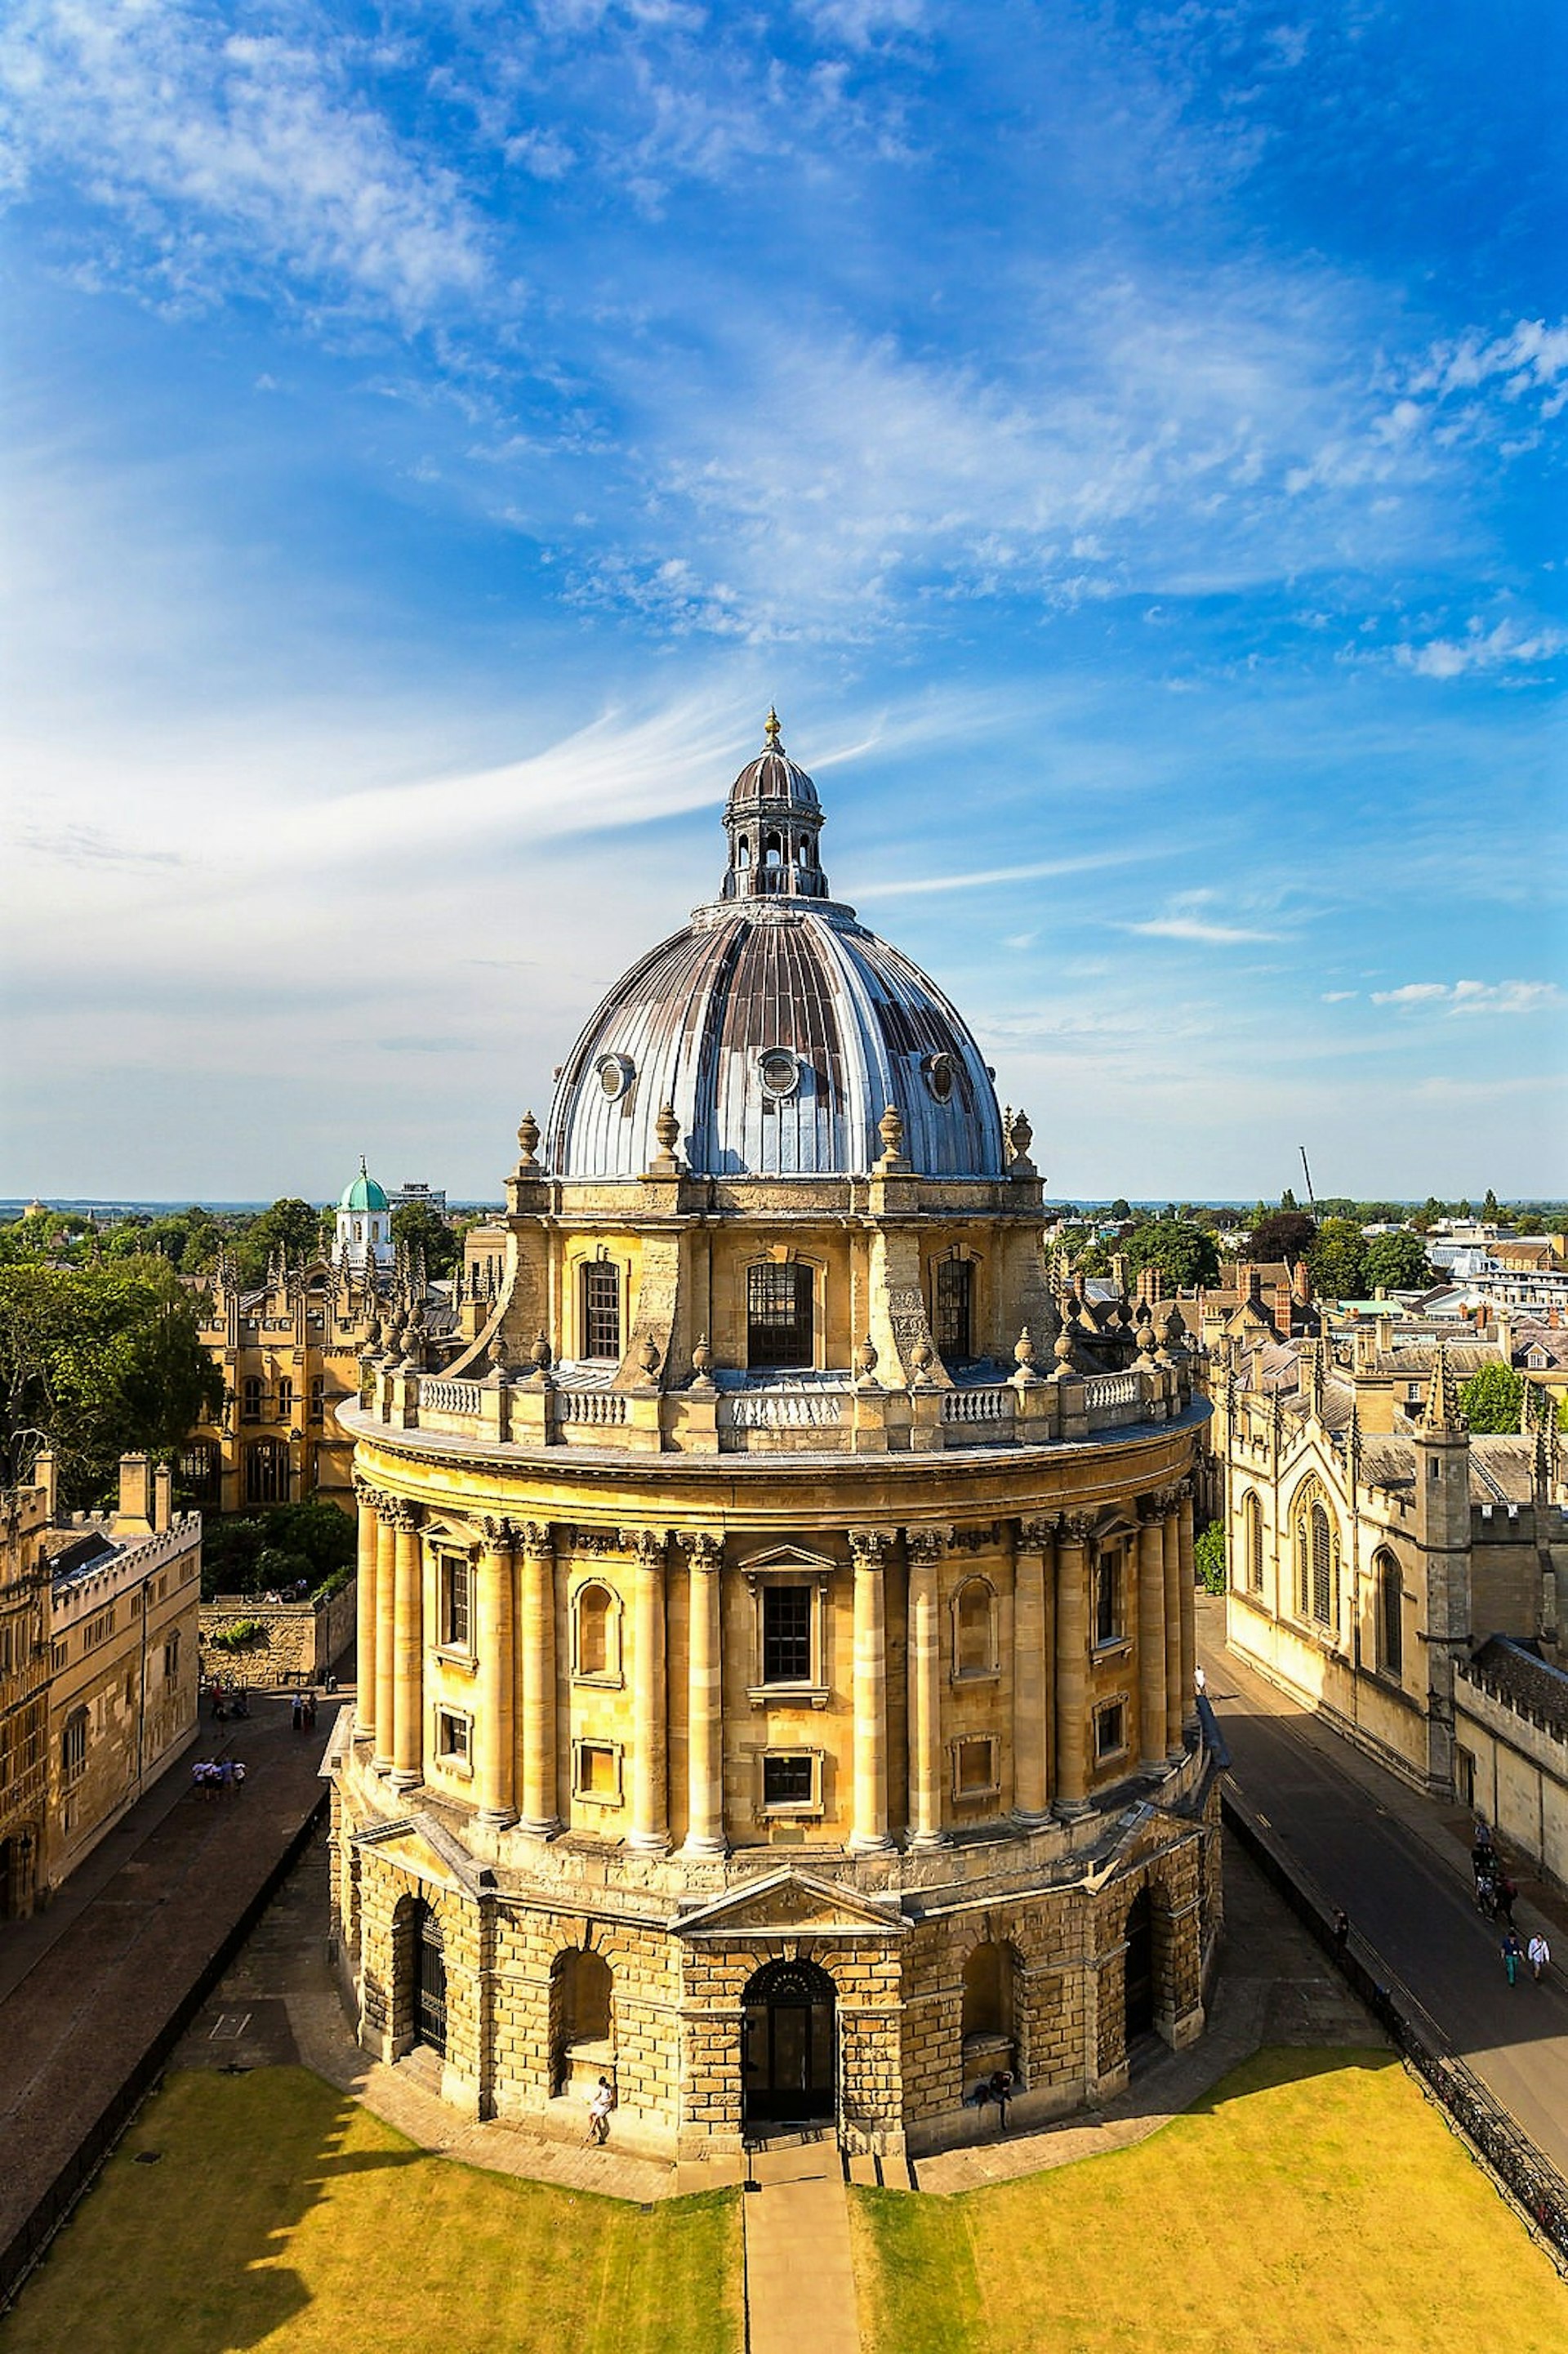 One of Tolkien's fantasy buildings was based on the beautiful Radcliffe Camera © S-F / Shutterstock